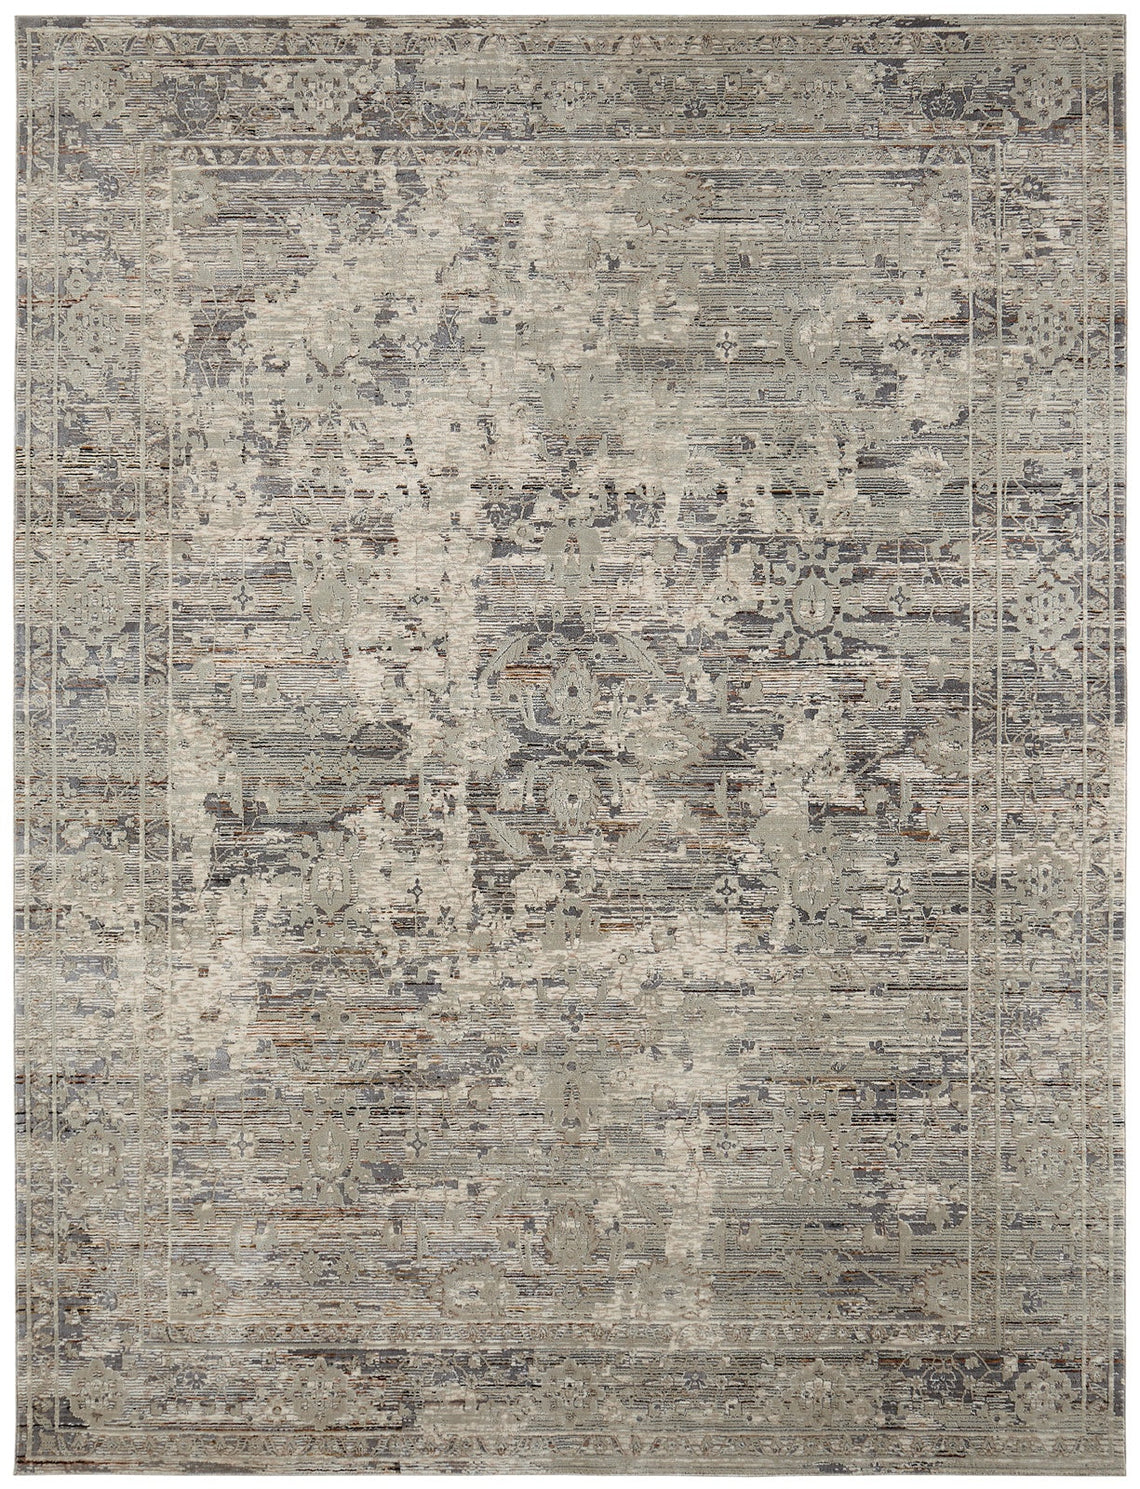 Camilla Graphite Greys 7 ft. 9 in. x 10 ft. Area Rug